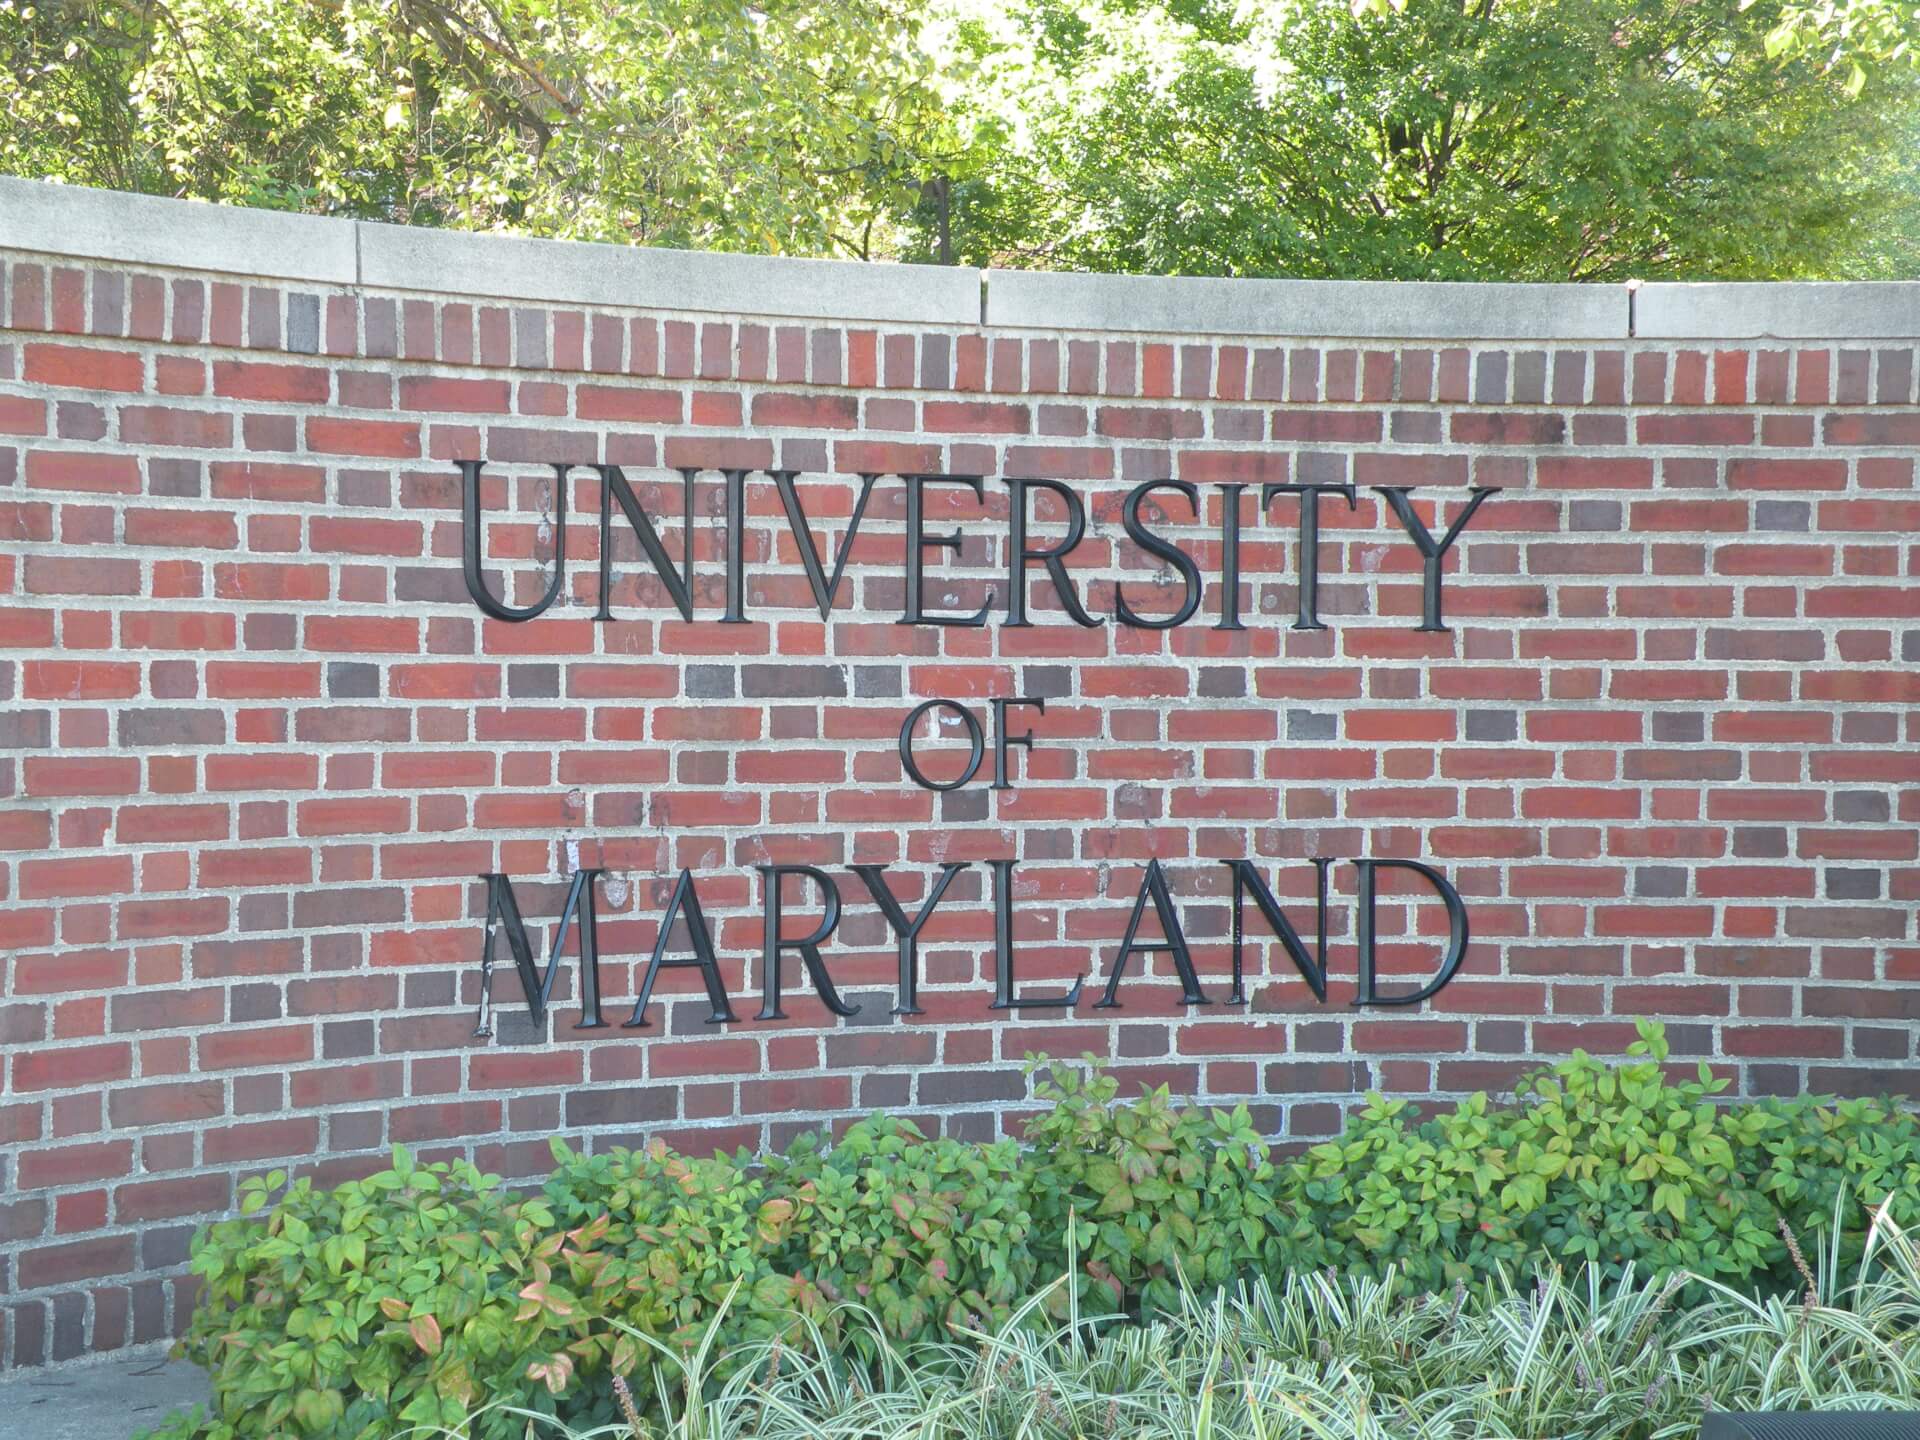 University of Maryland welcome sign